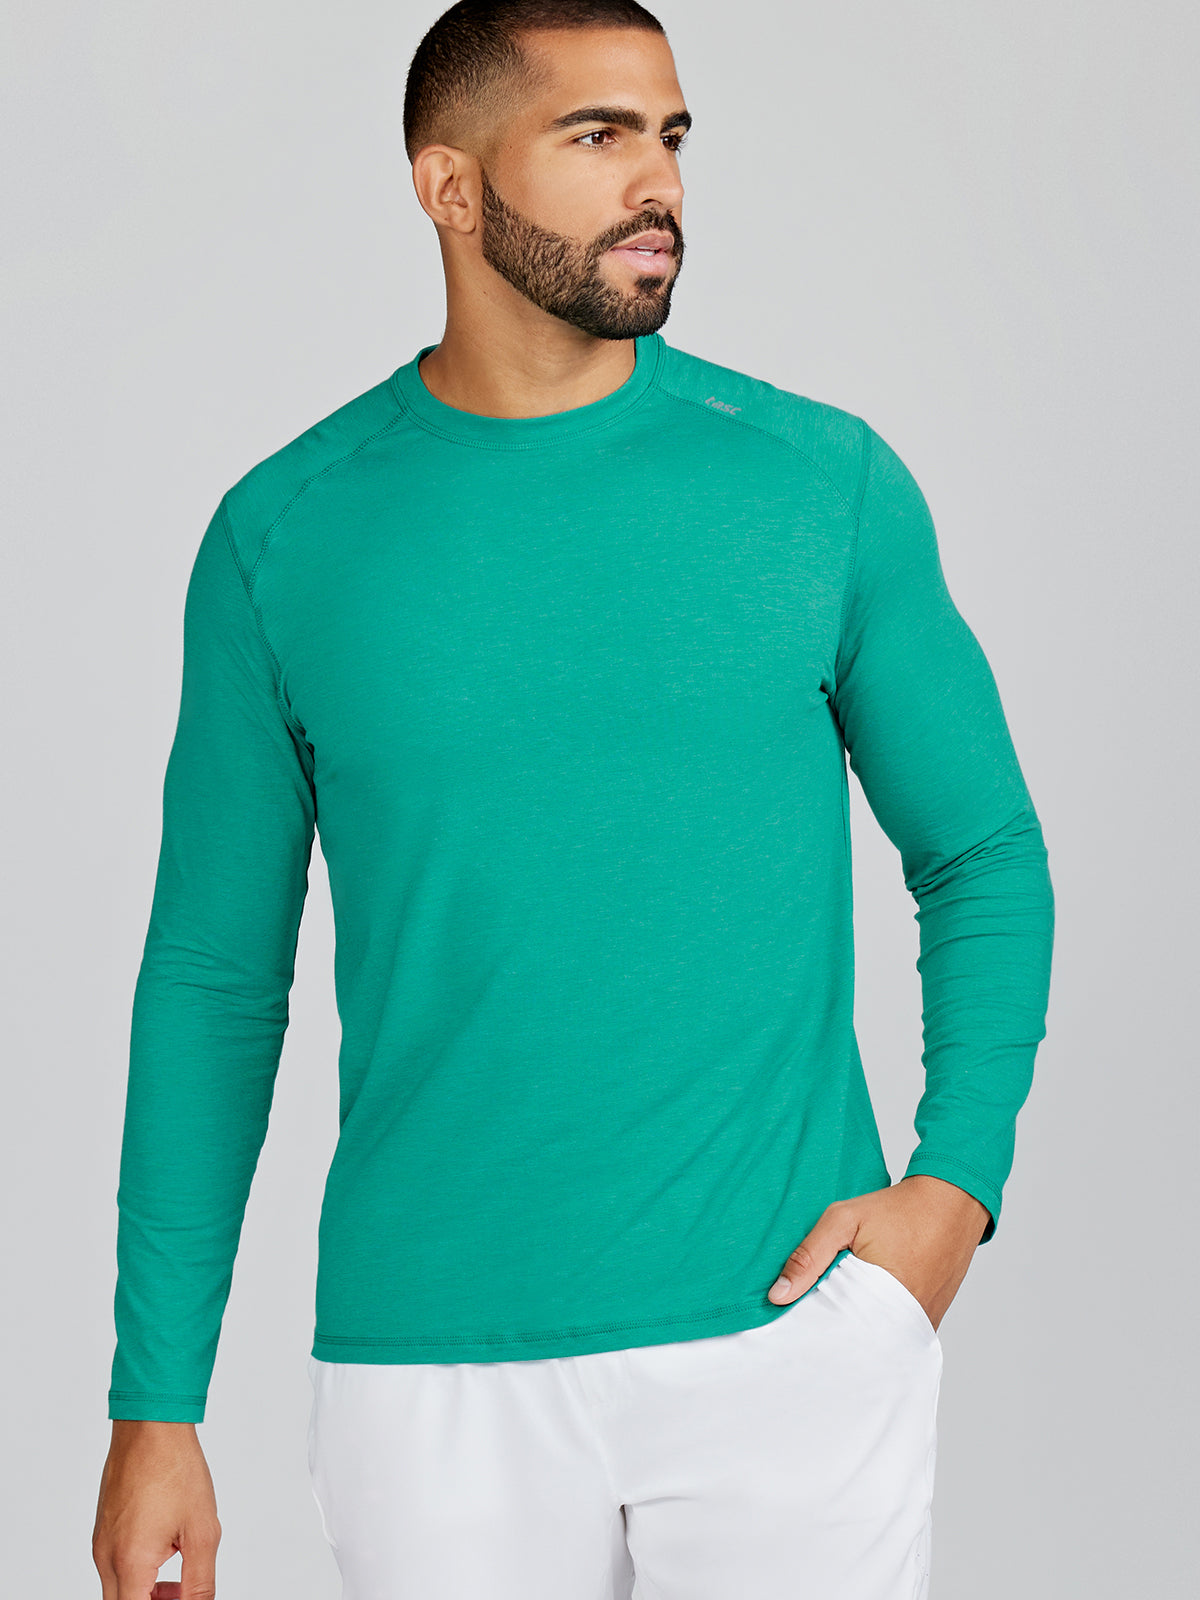 tasc Carrolton Long Sleeve T-Shirt in Jade Heather L by Island Trends